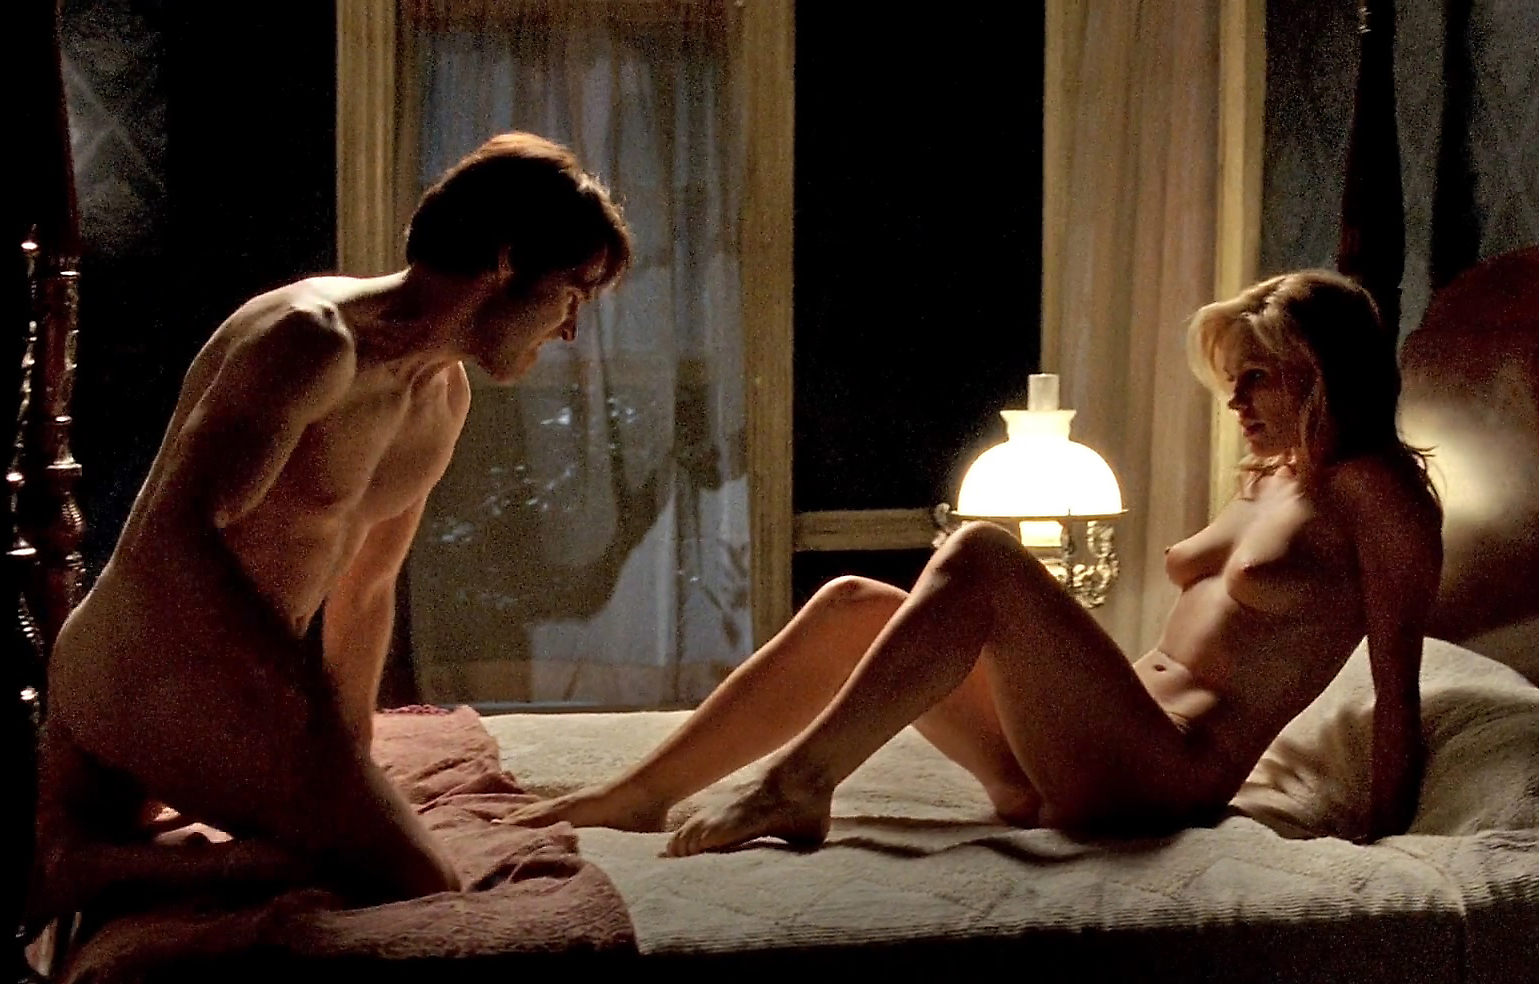 adam cyrier recommends anna paquin naked pic